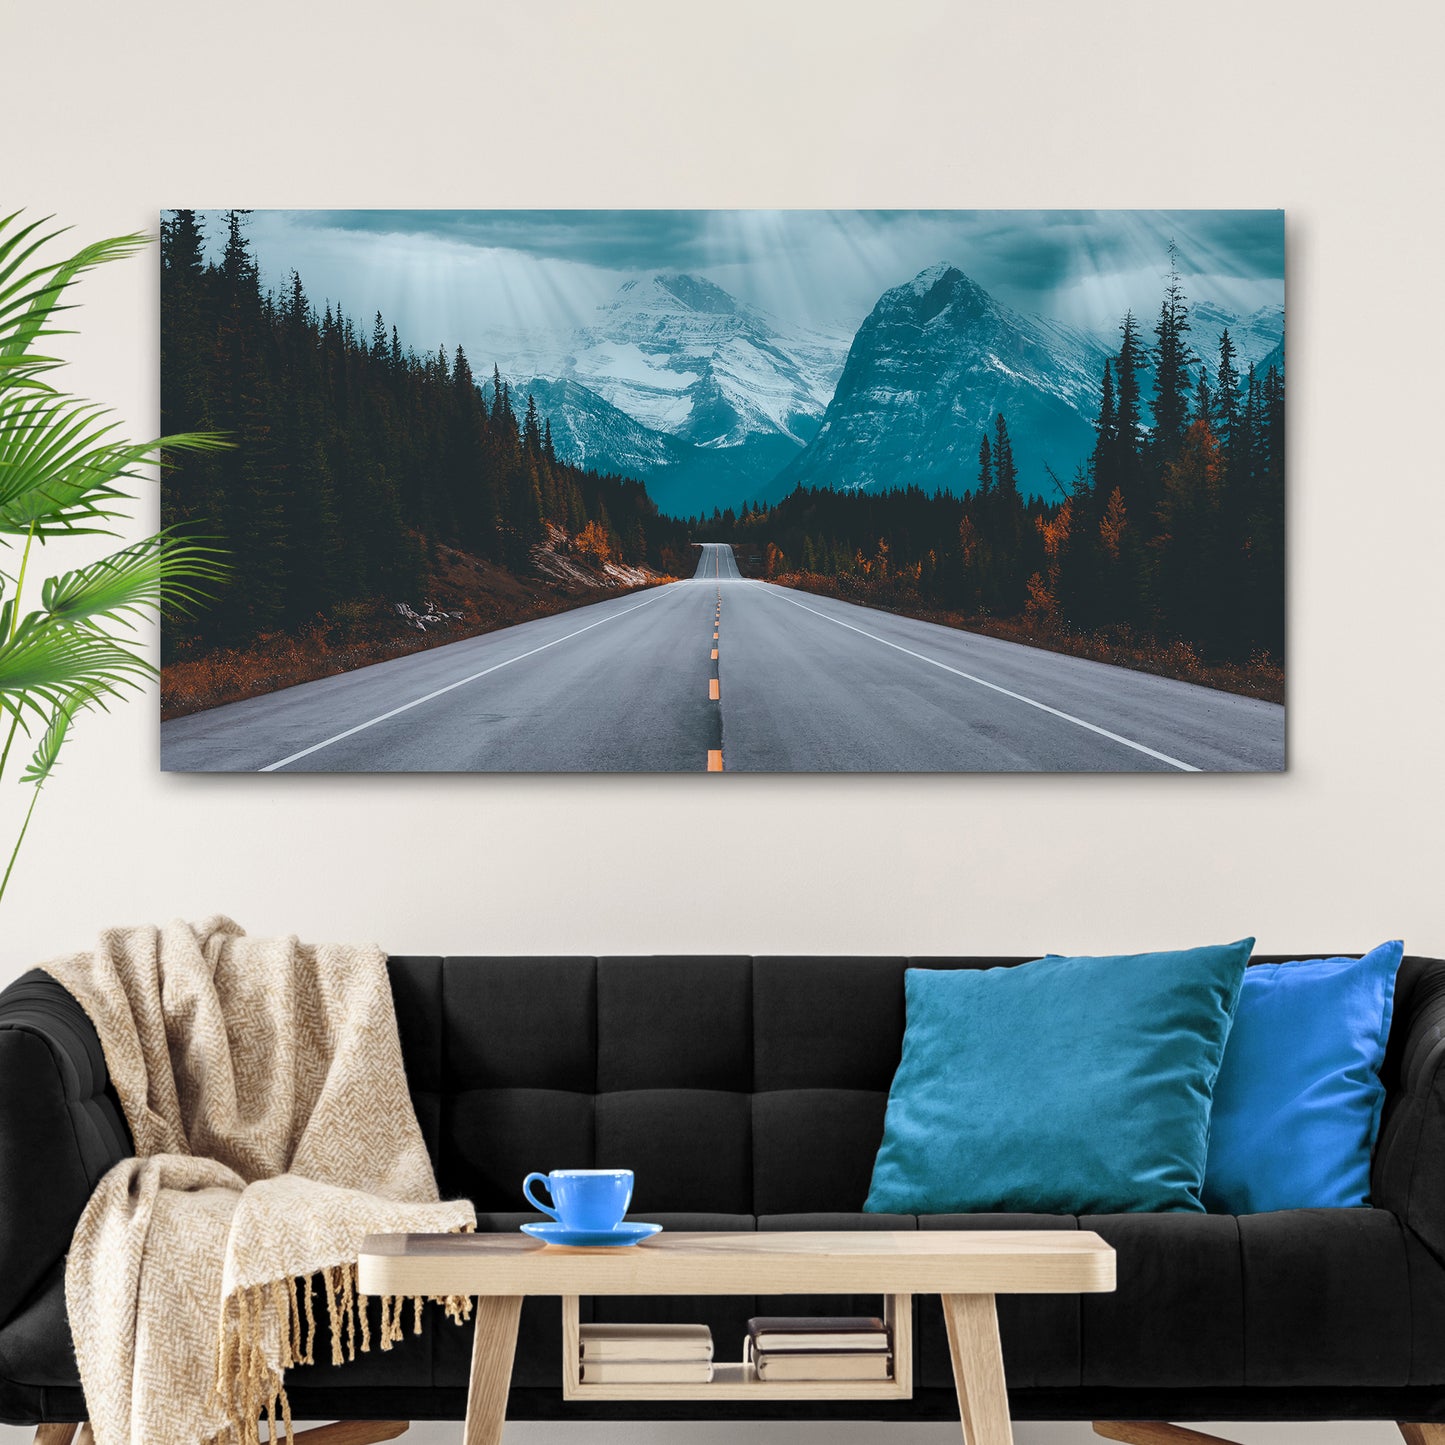 Middle Road To Snowy Mountain Canvas Wall Art Style 2 - Image by Tailored Canvases